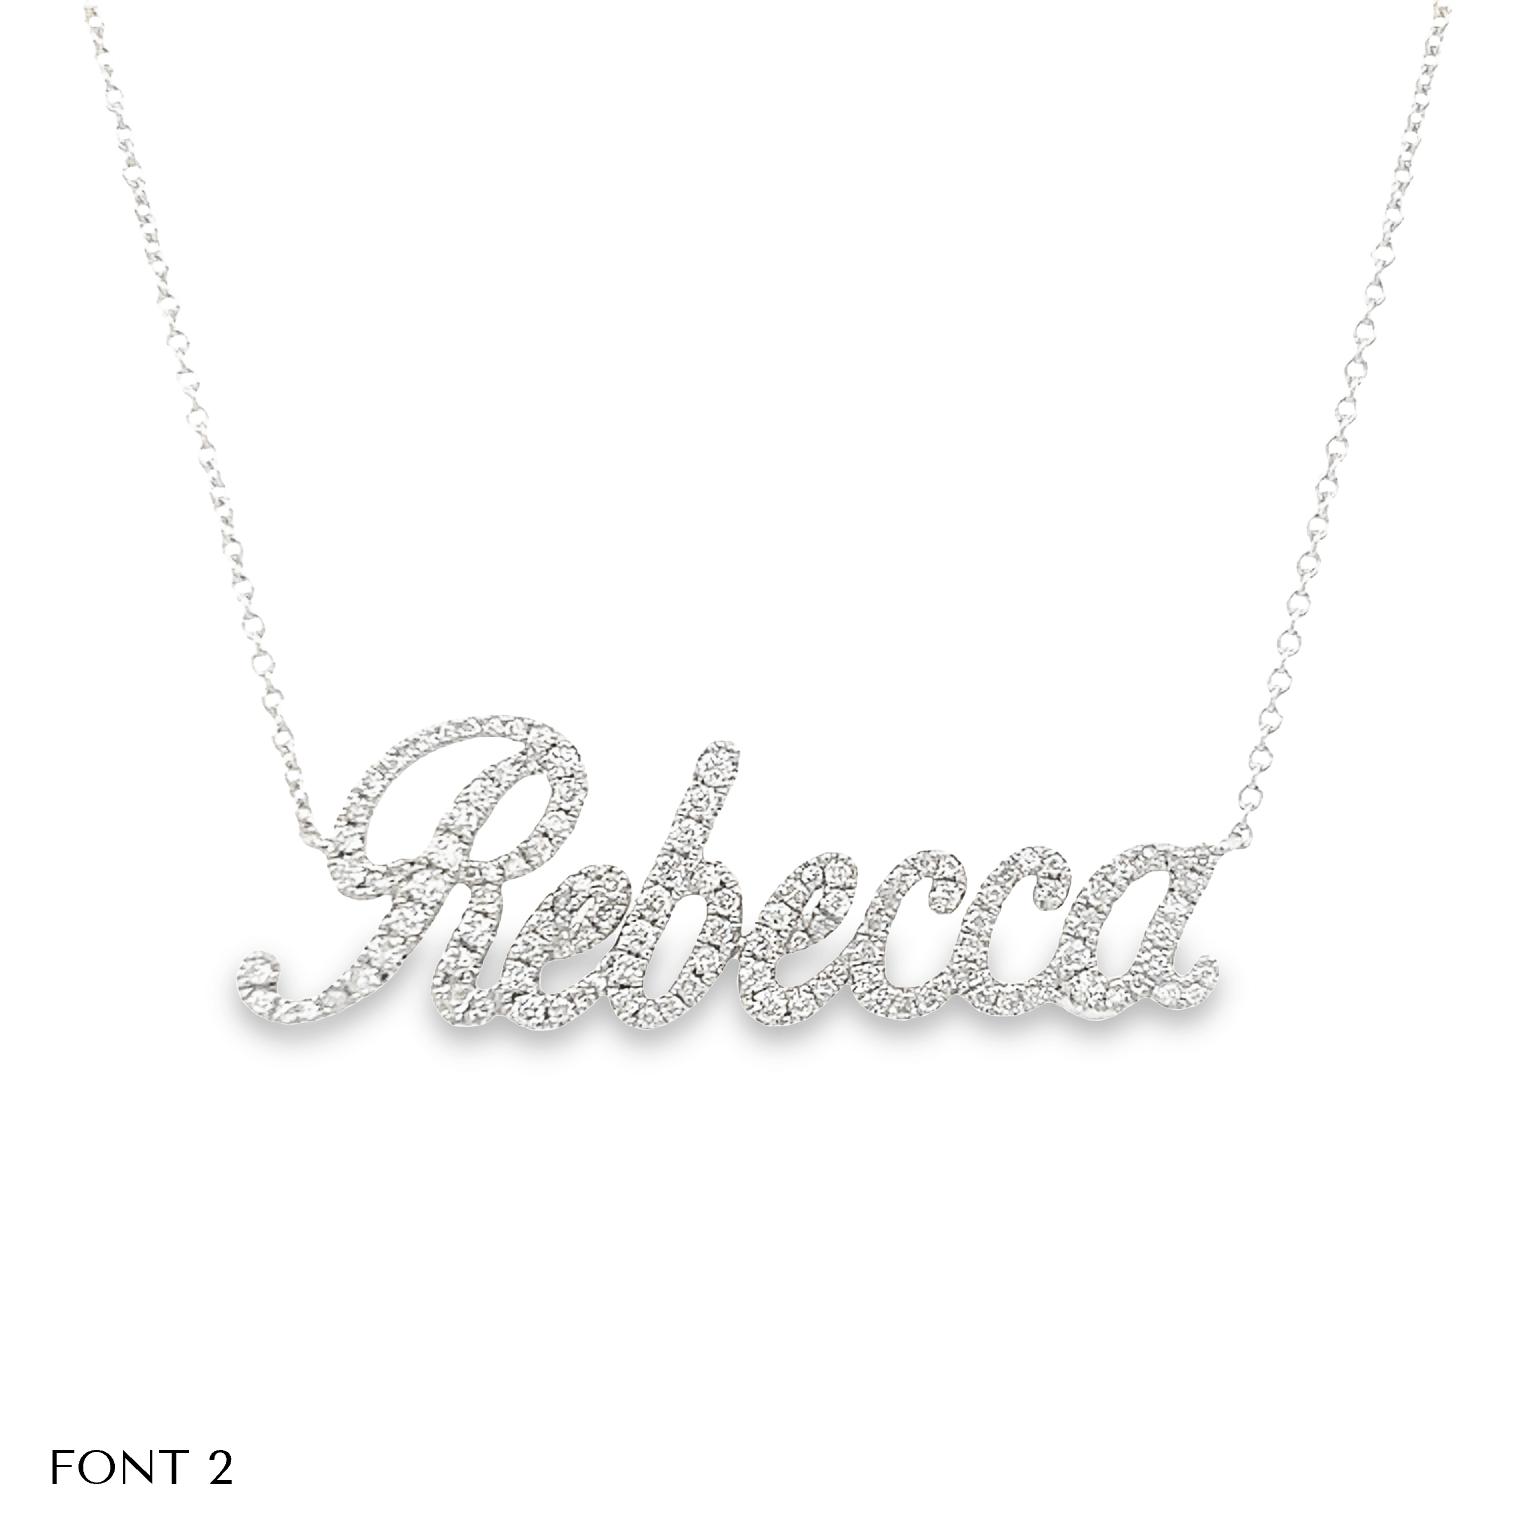 Personalized 1/4 Carat Diamond Nameplate Necklace 14K White or